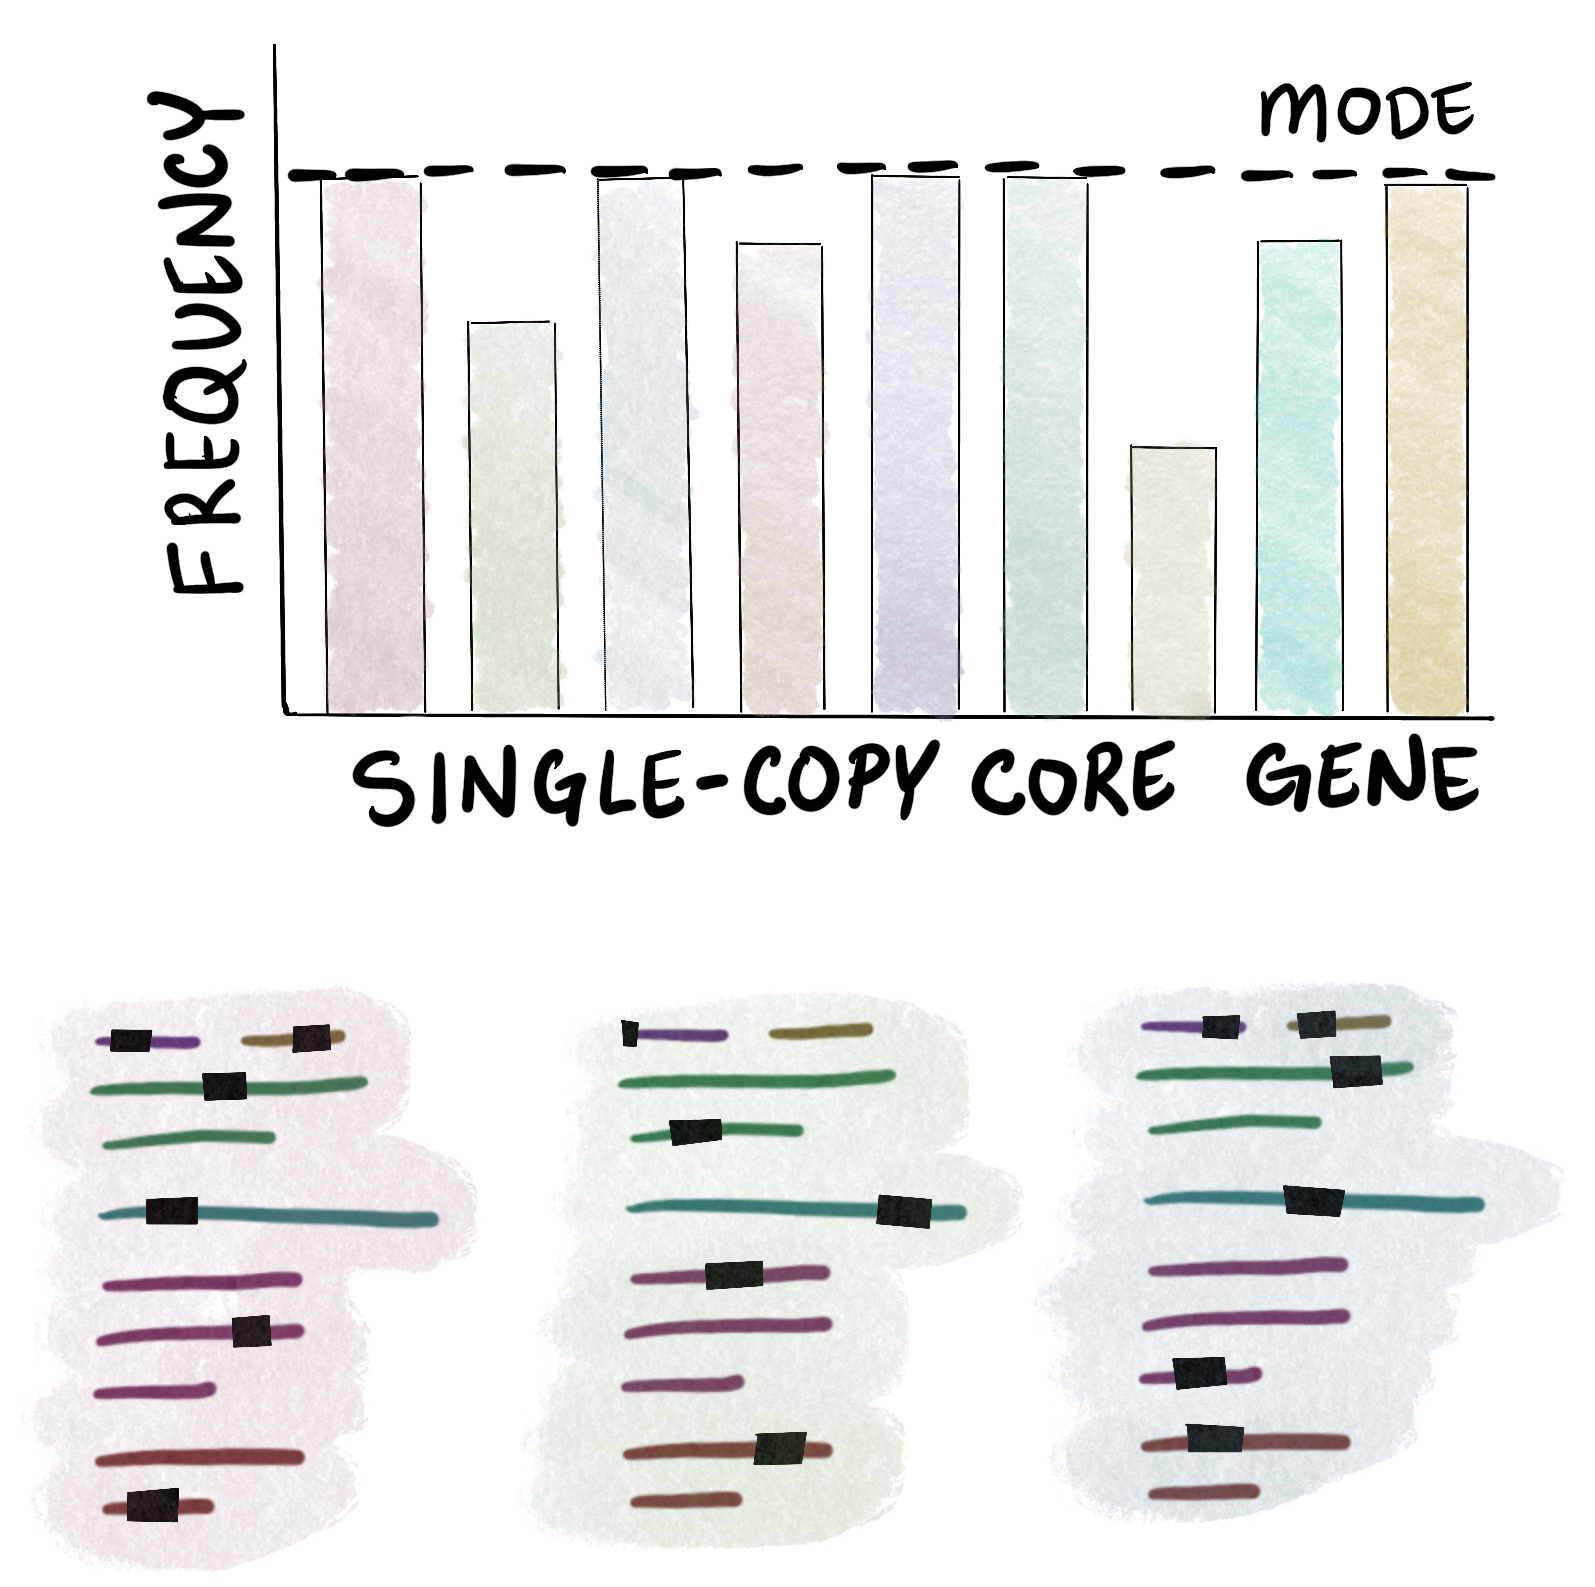 Estimating the number of microbial populations using the mode of single-copy core gene annotations